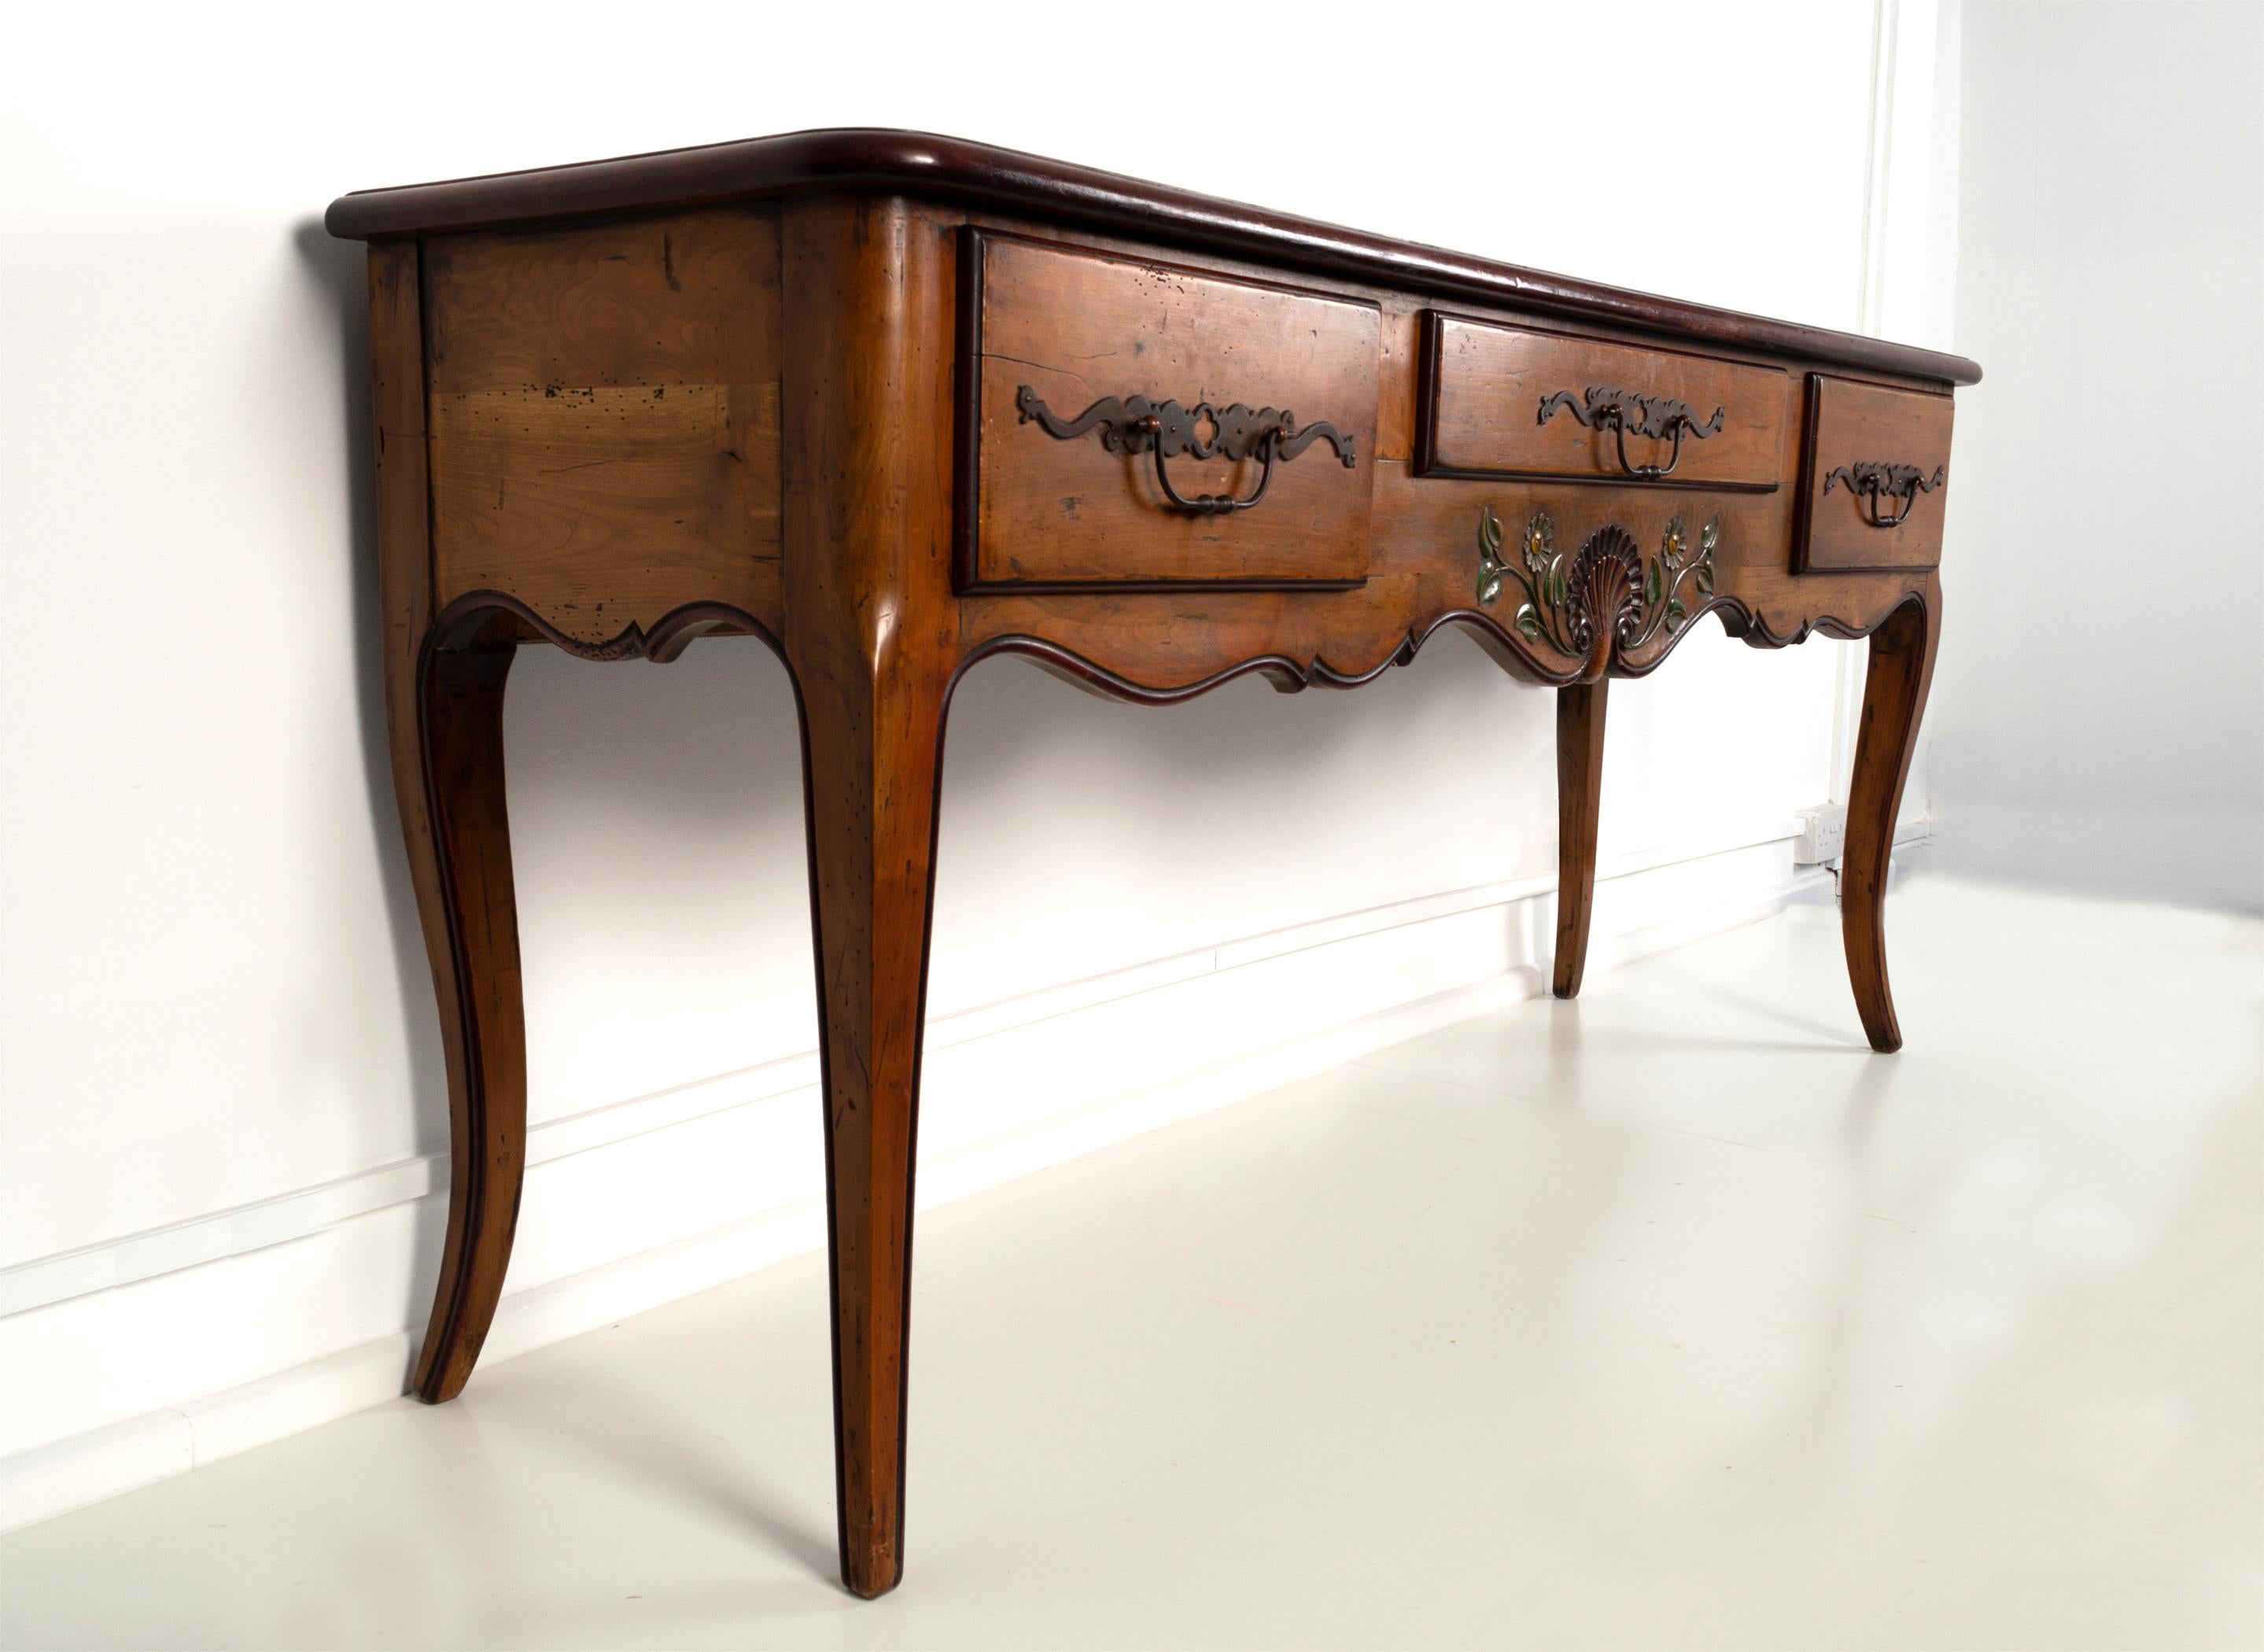 An Antique 19th Century French Solid Cherrywood Sideboard Server
A three drawer server with an attractive scalloped apron, rising on cabriole legs.
A beautiful example In excellent condition commensurate of age.